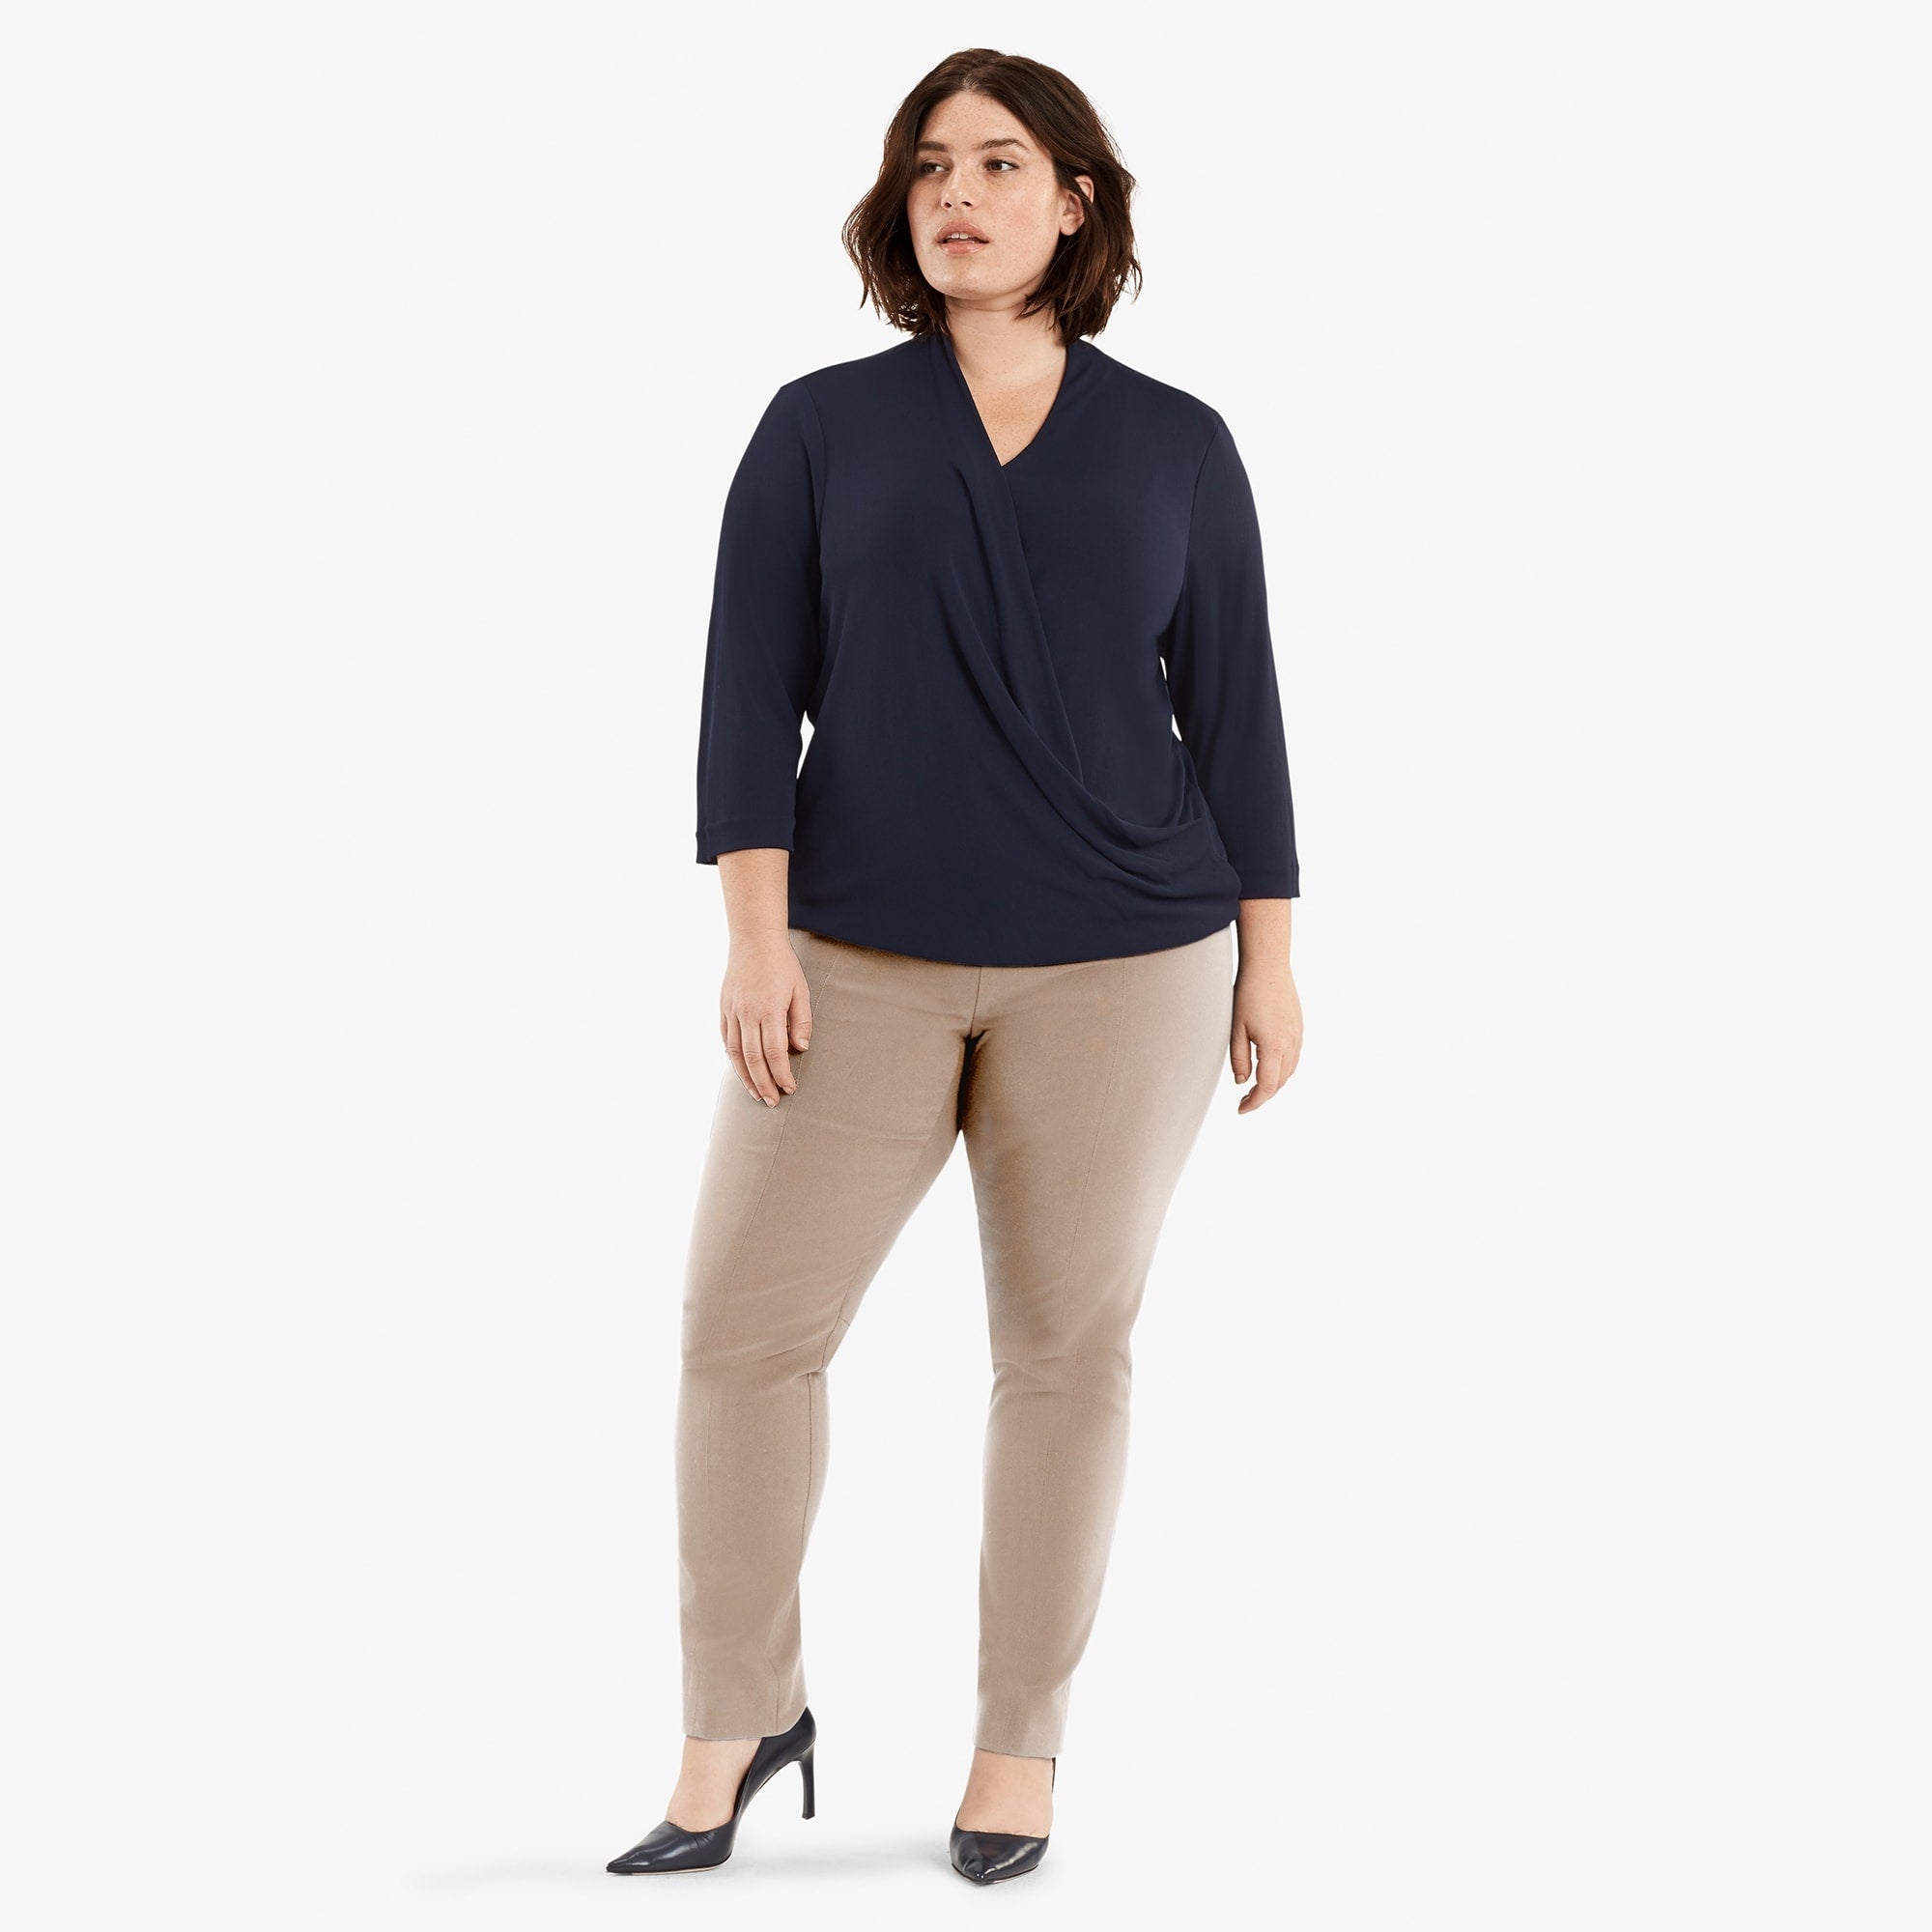 Front image of a woman standing wearing the Foster Pant in Russet